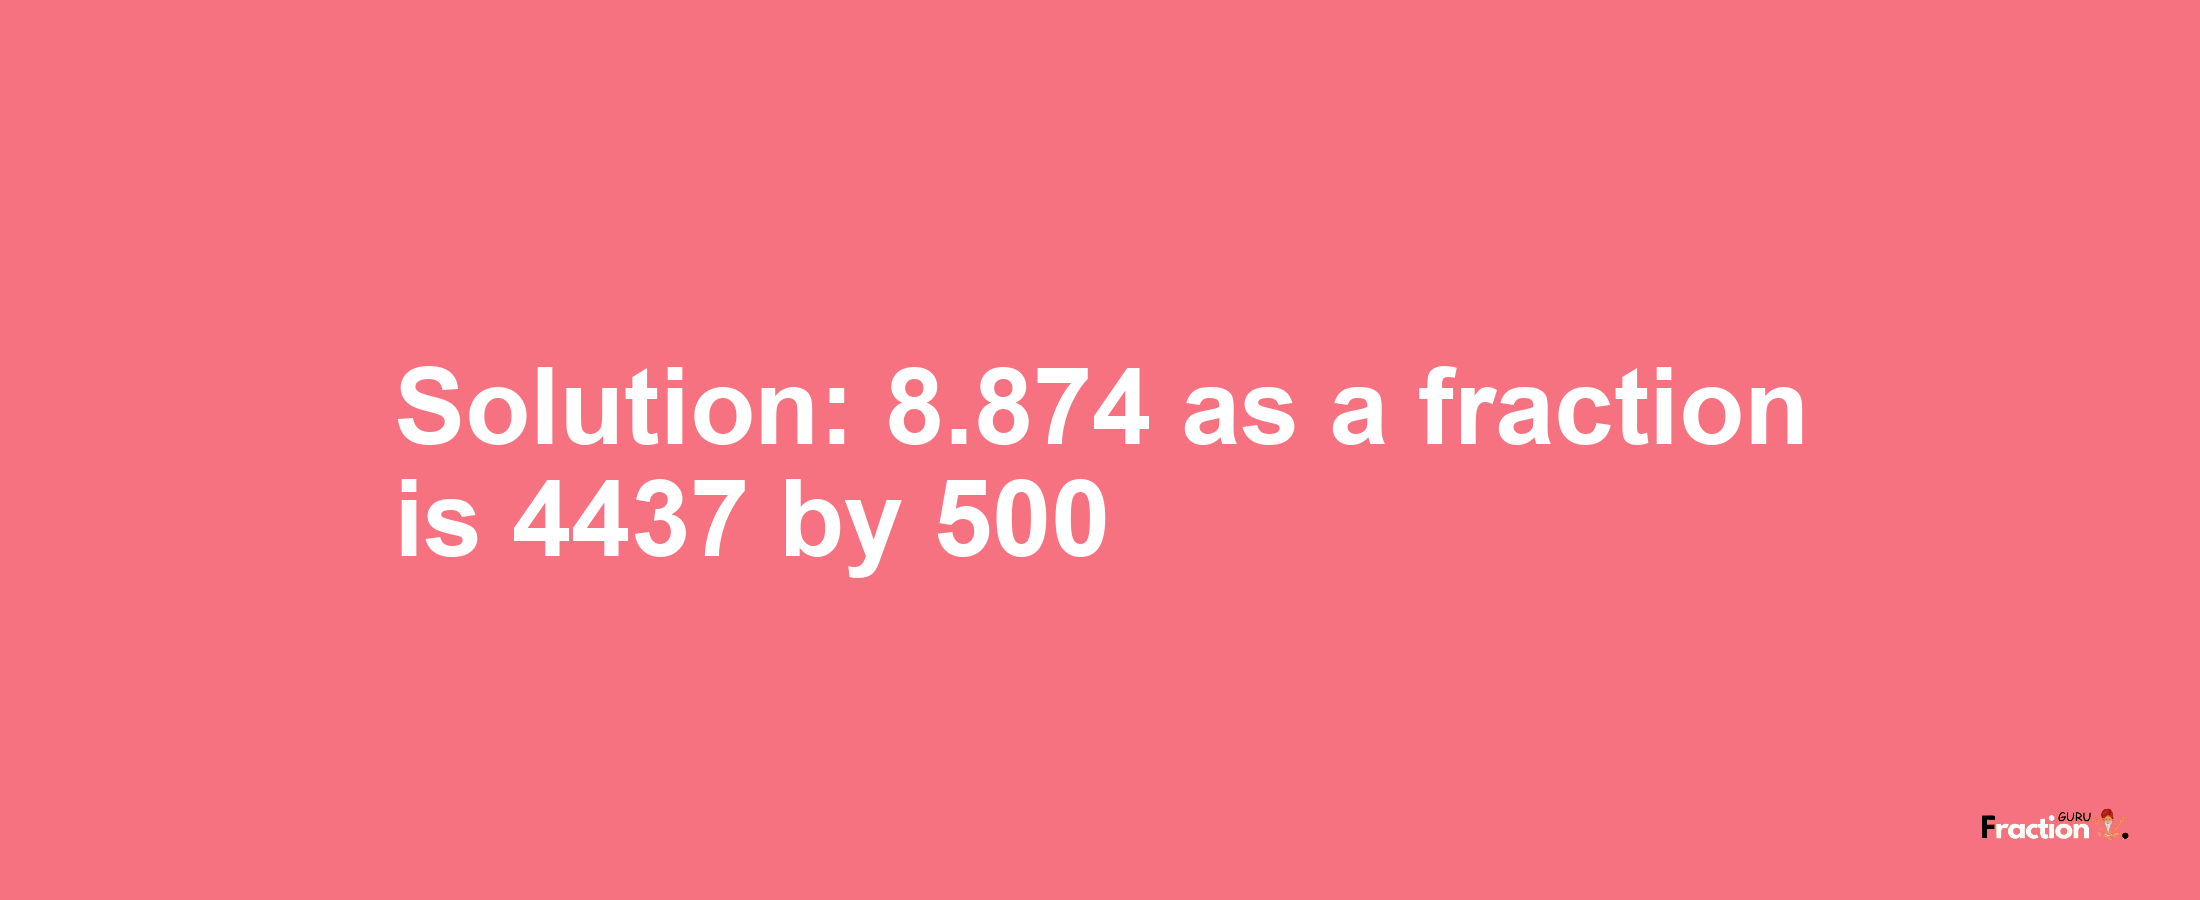 Solution:8.874 as a fraction is 4437/500